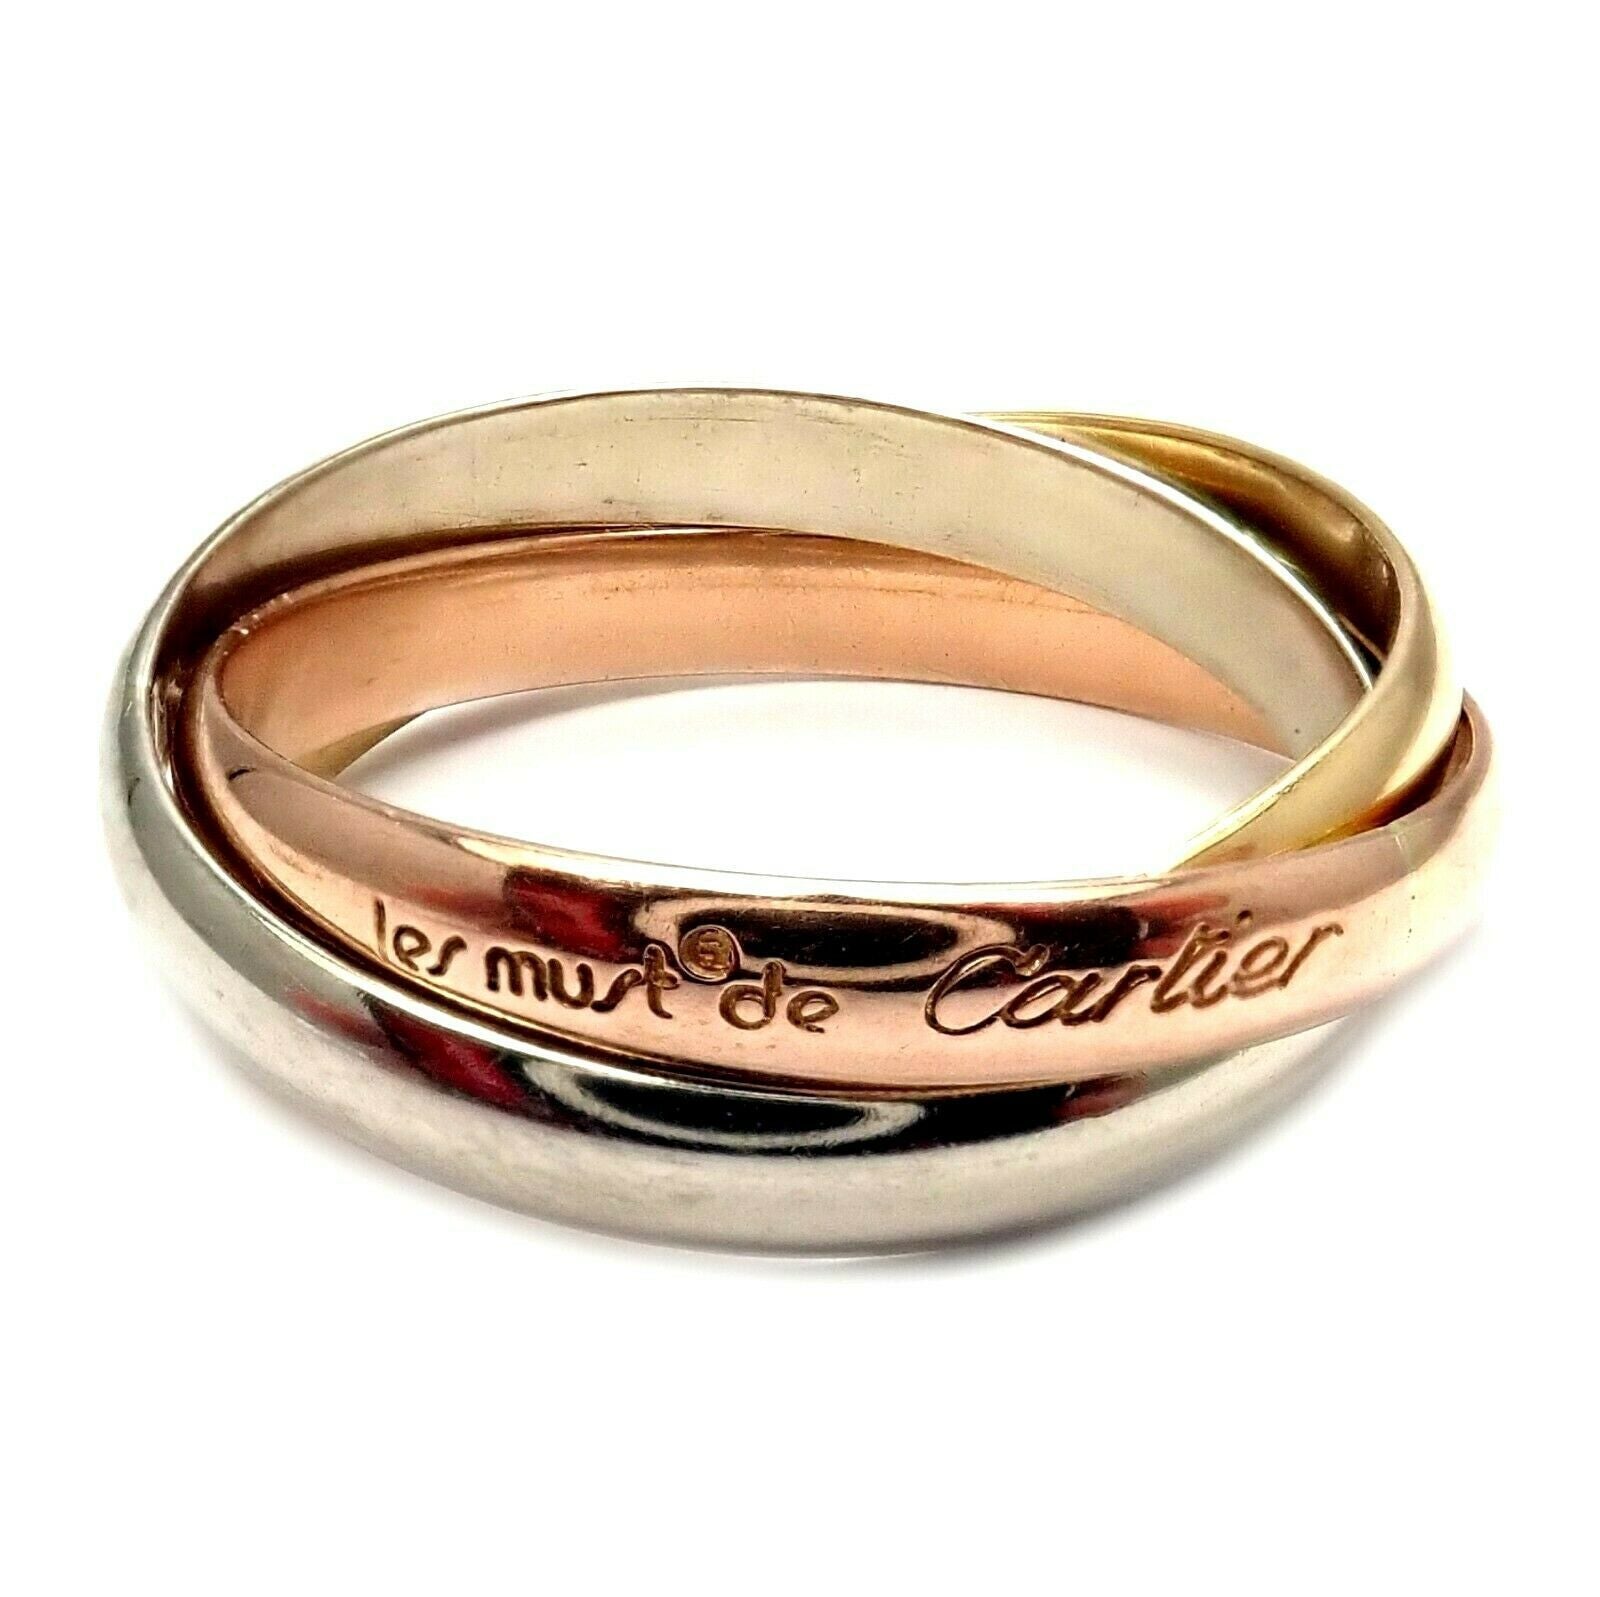 Cartier Jewelry & Watches:Fine Jewelry:Rings Authentic! Must De Cartier Three Color 18k Gold Trinity Band Ring US 10.25 EU 63